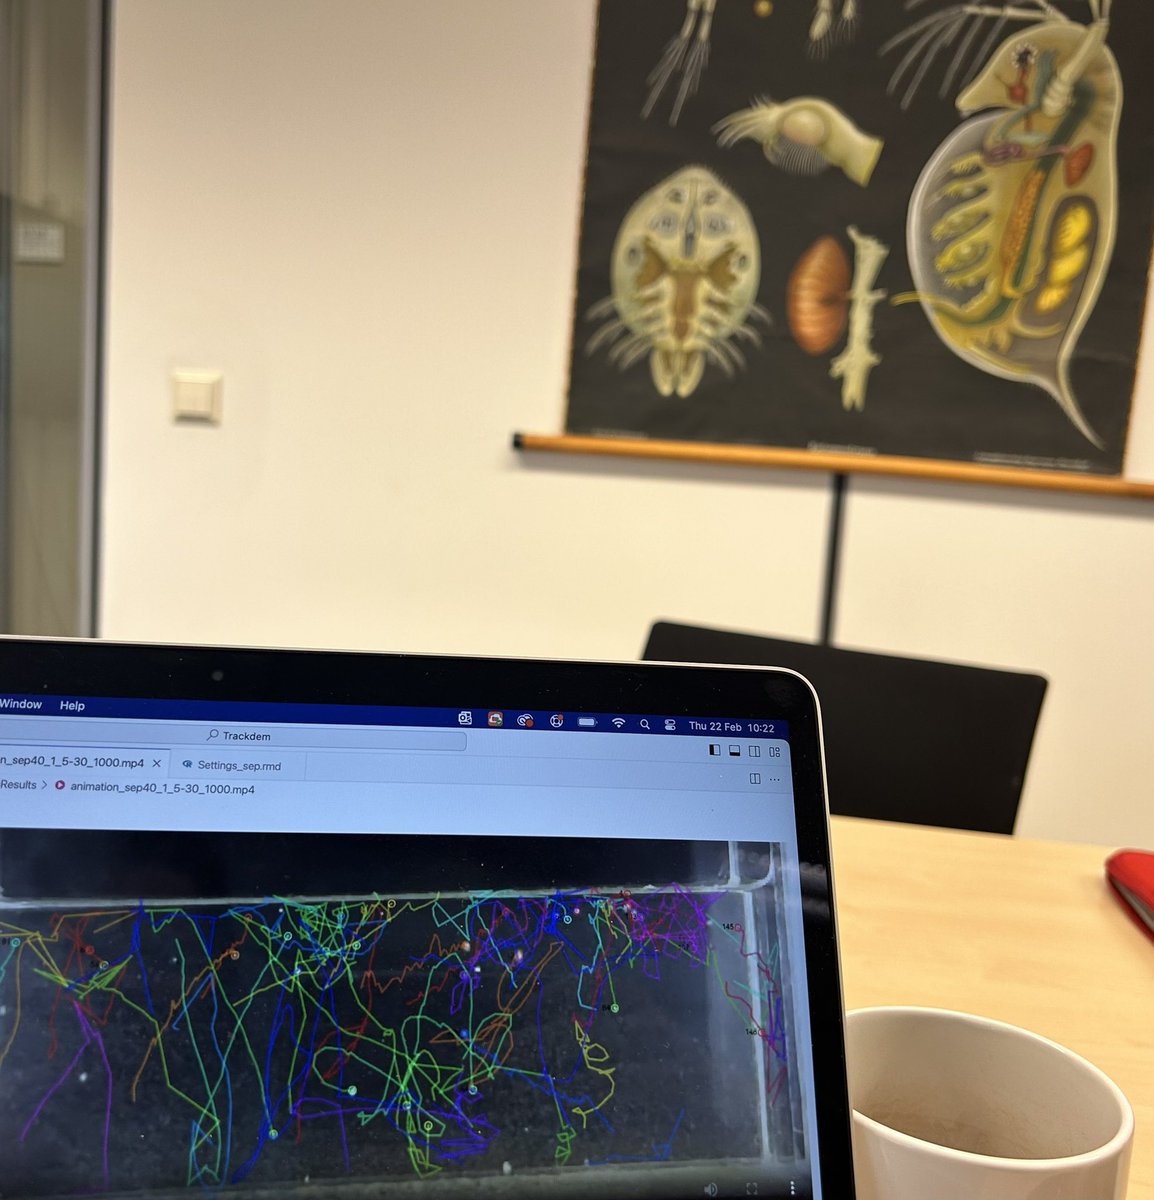 Nice day in the office with Bregje Brinkmann and work of Lan Dupuis Work in progress on swimming behaviour of waterfleas exposed to nano-embedded chemicals @LeidenScience European Research Council #ERC consolidation grant no 101002123 lnkd.in/eEKV6CDy